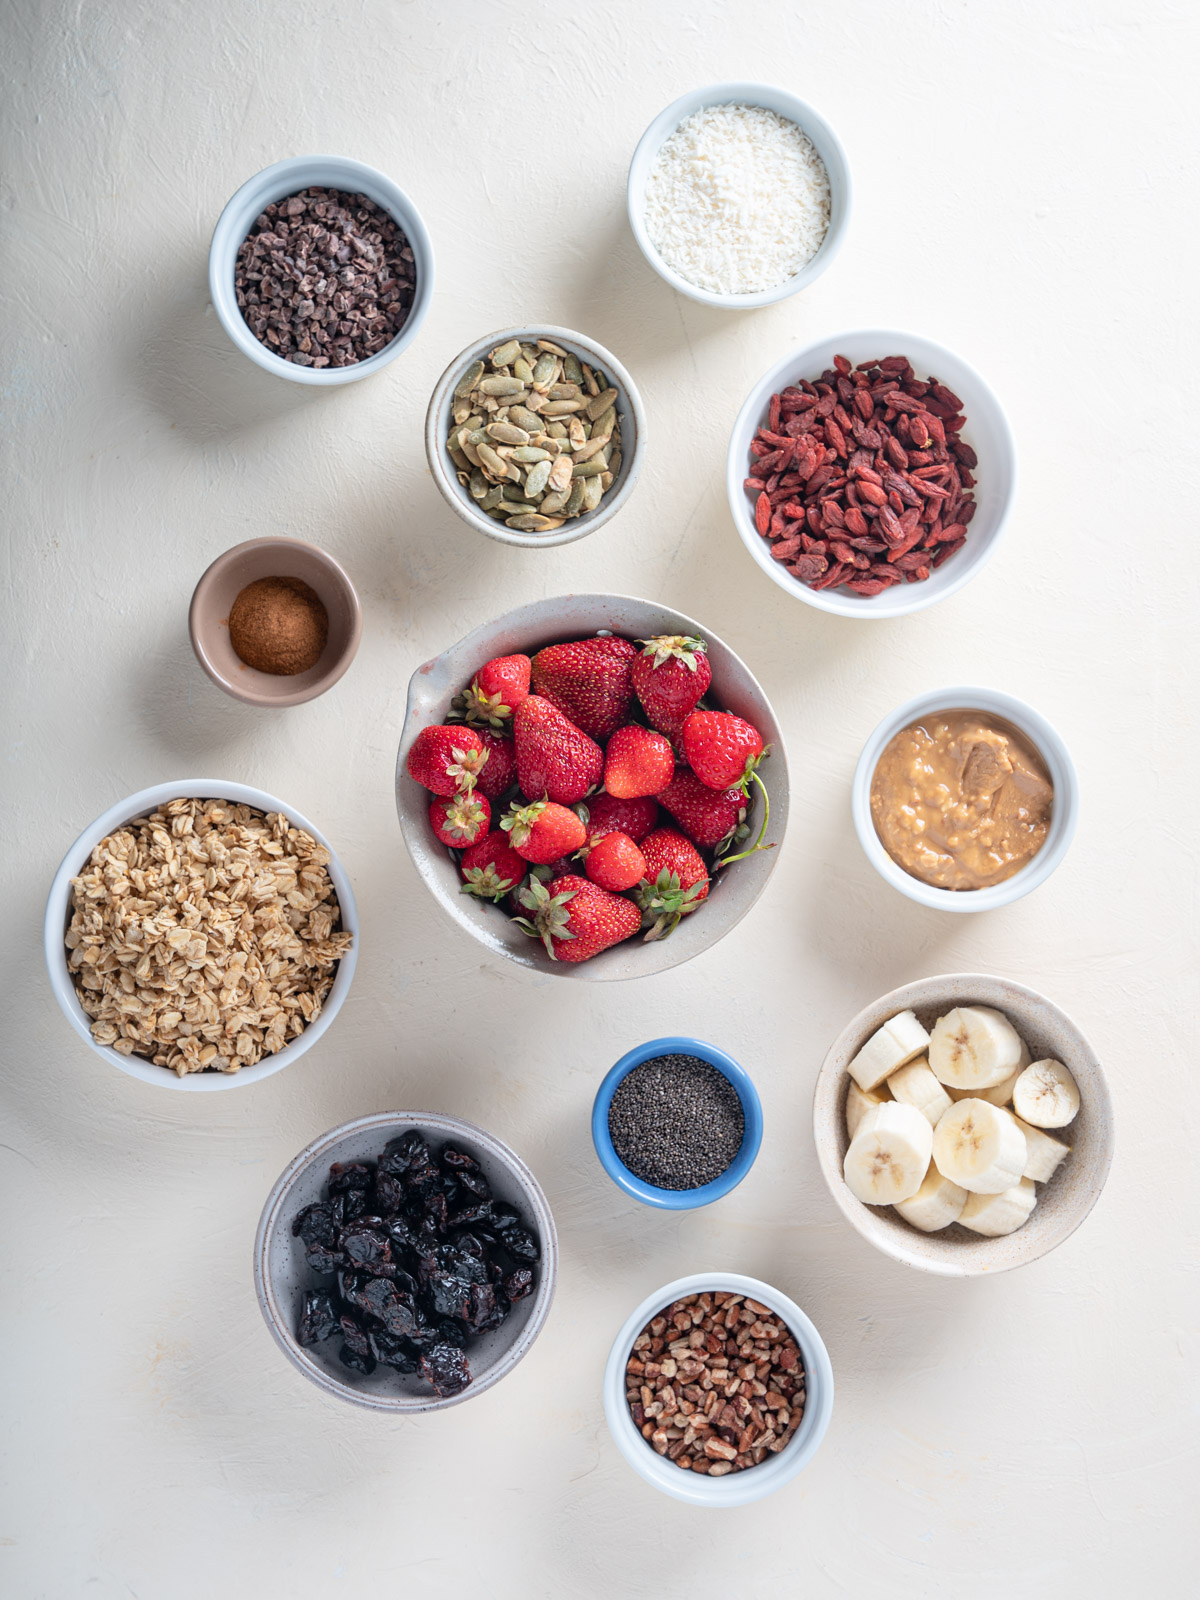 Ingredients for Strawberry Smoothie Bowls